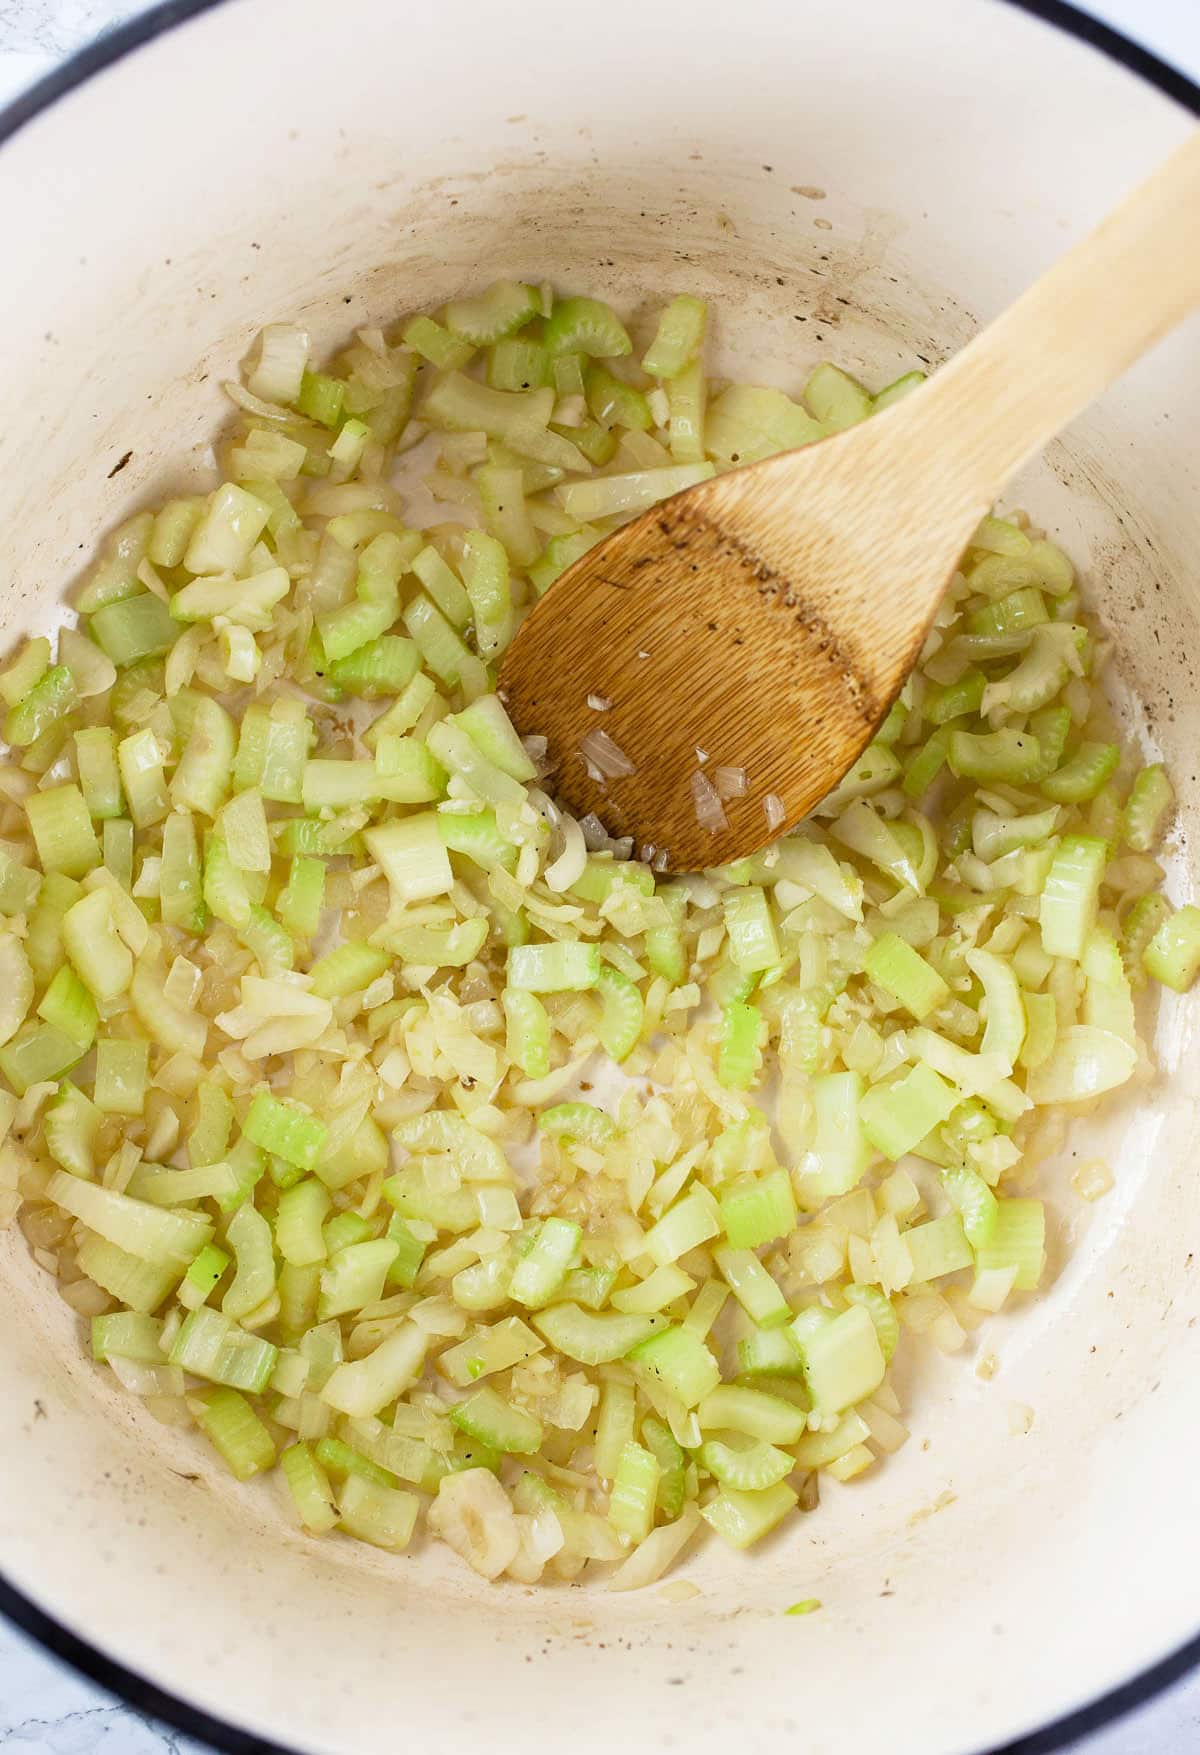 Garlic, onions, and celery sautéed in white Dutch oven.